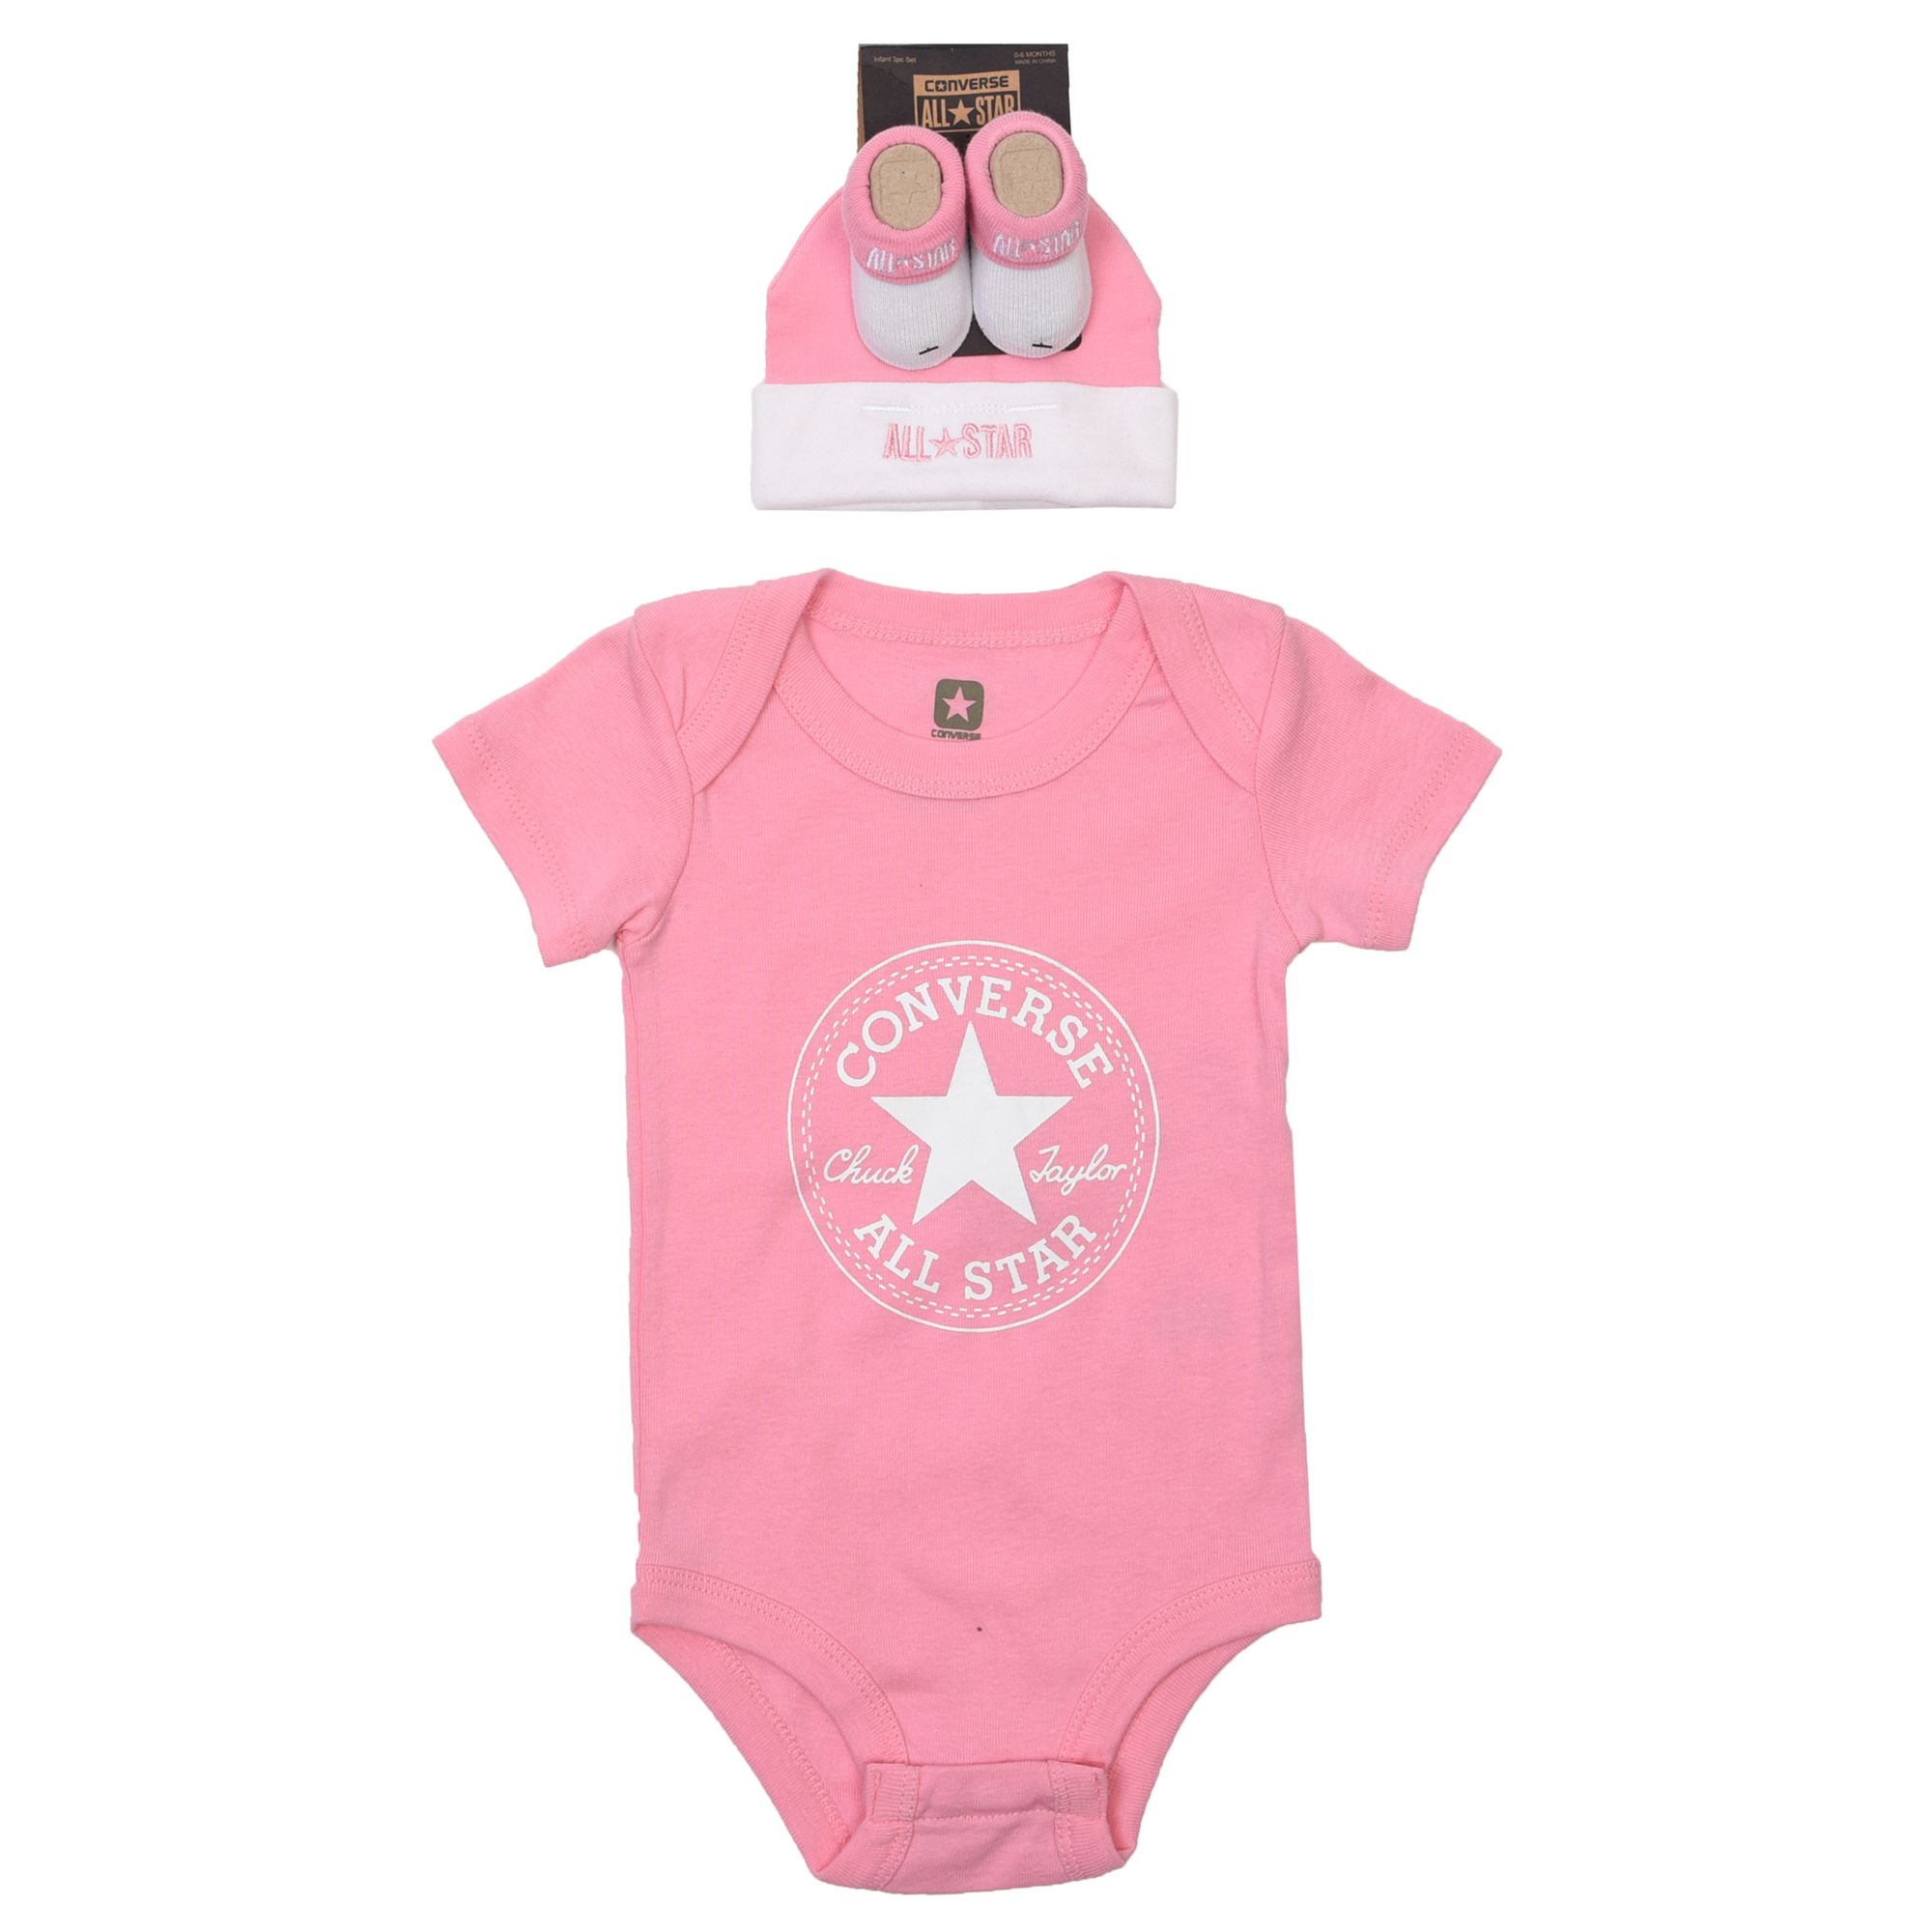 Converse Baby 3 Piece Bodysuit, and Gift Set